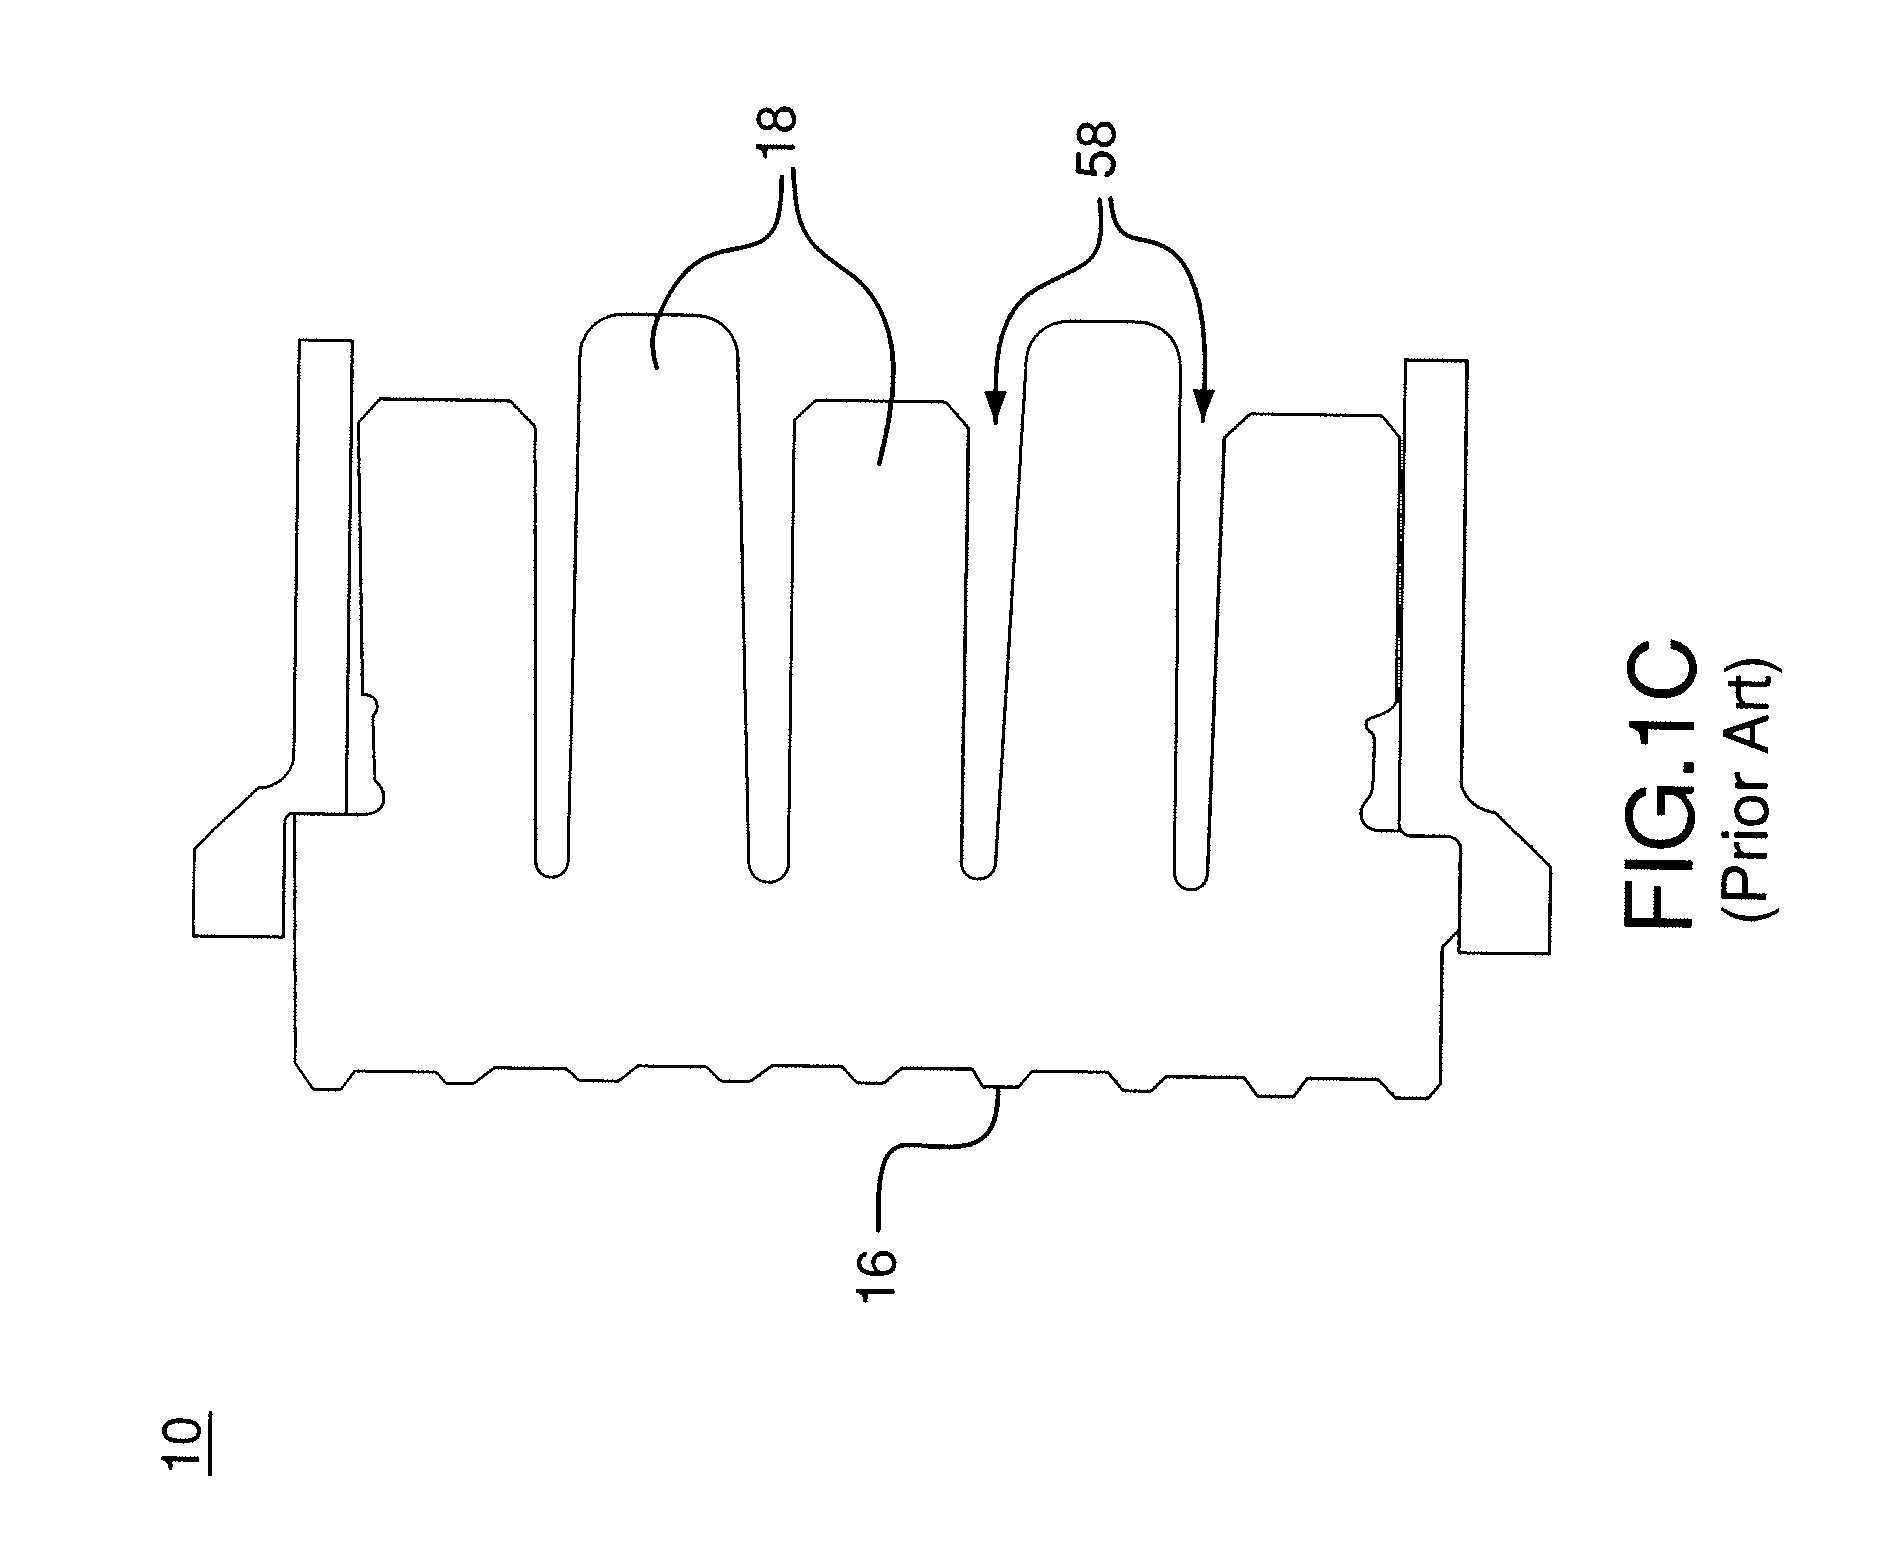 Electrical connector with stress-distribution features